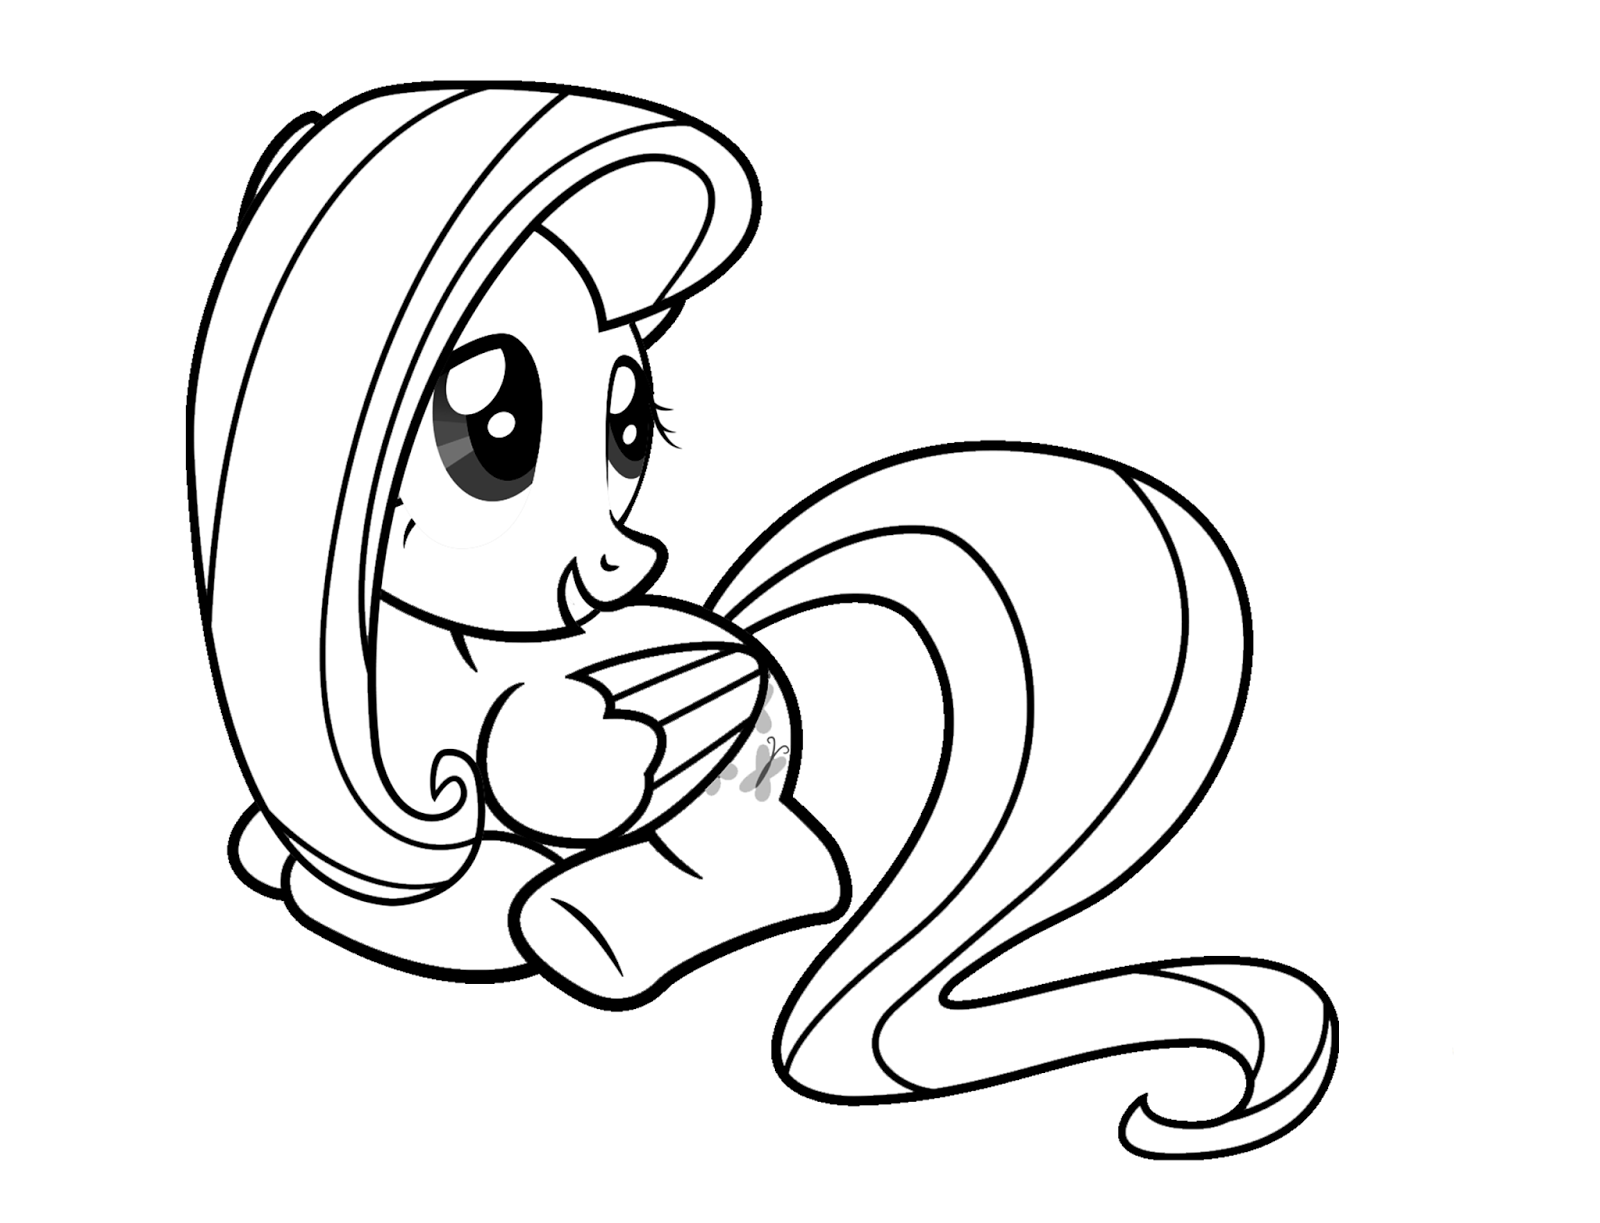 Fluttershy Coloring Pages   Best Coloring Pages For Kids